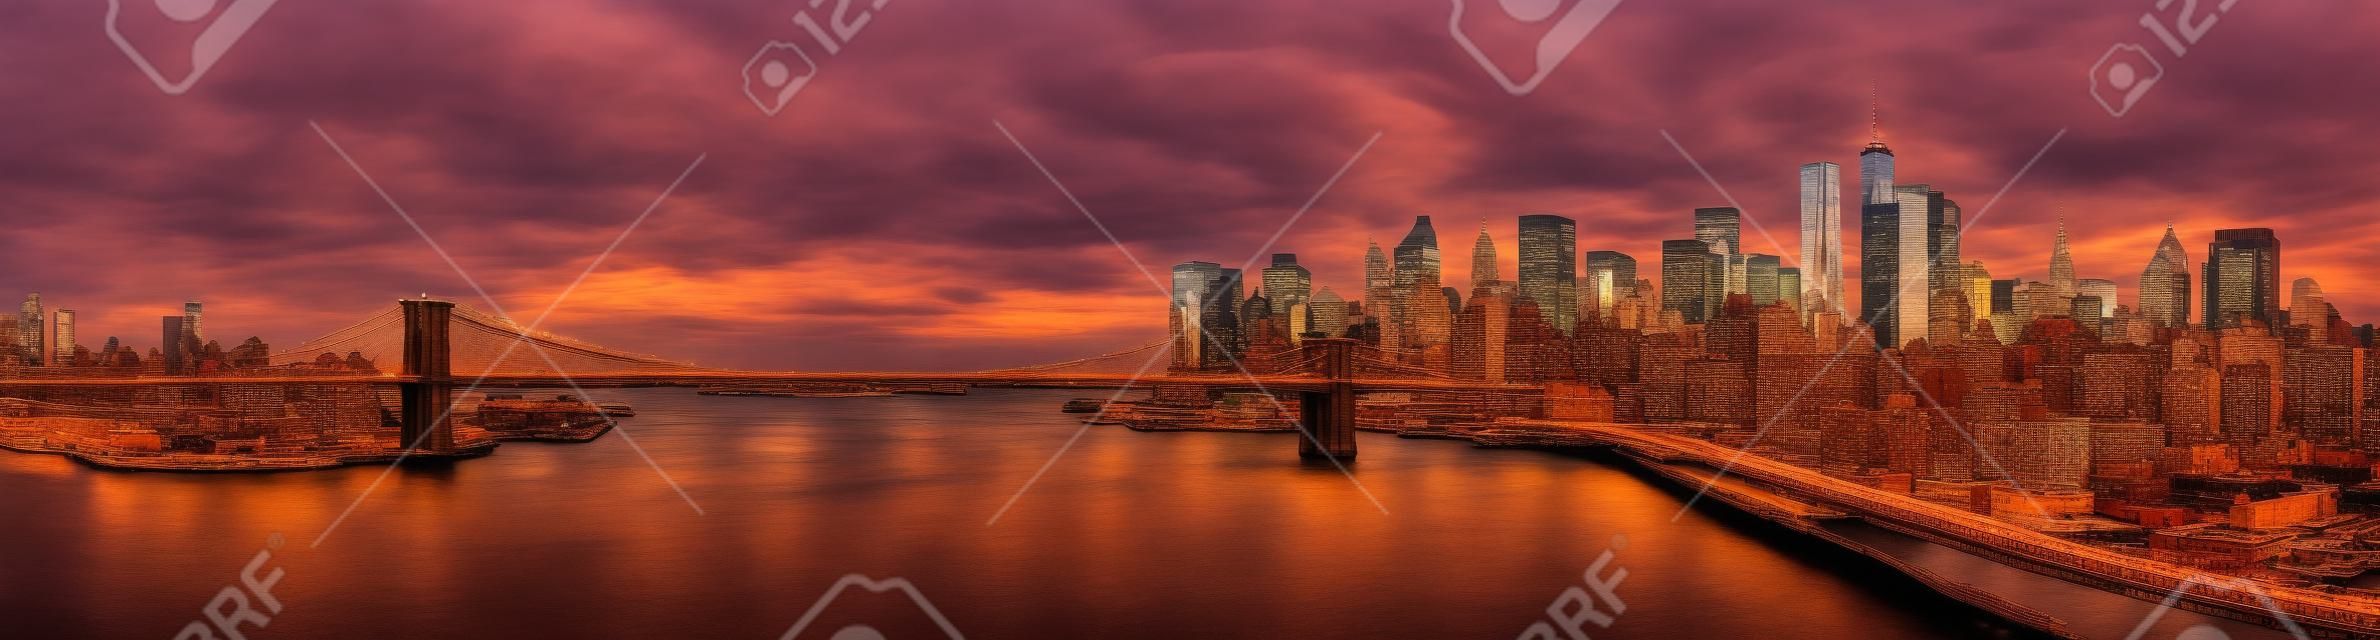 Brooklyn Bridge panorama at sunset. The iconic landmark spans between Brooklyn and the New York Financial District skyline, dominated by the Freedom Tower.